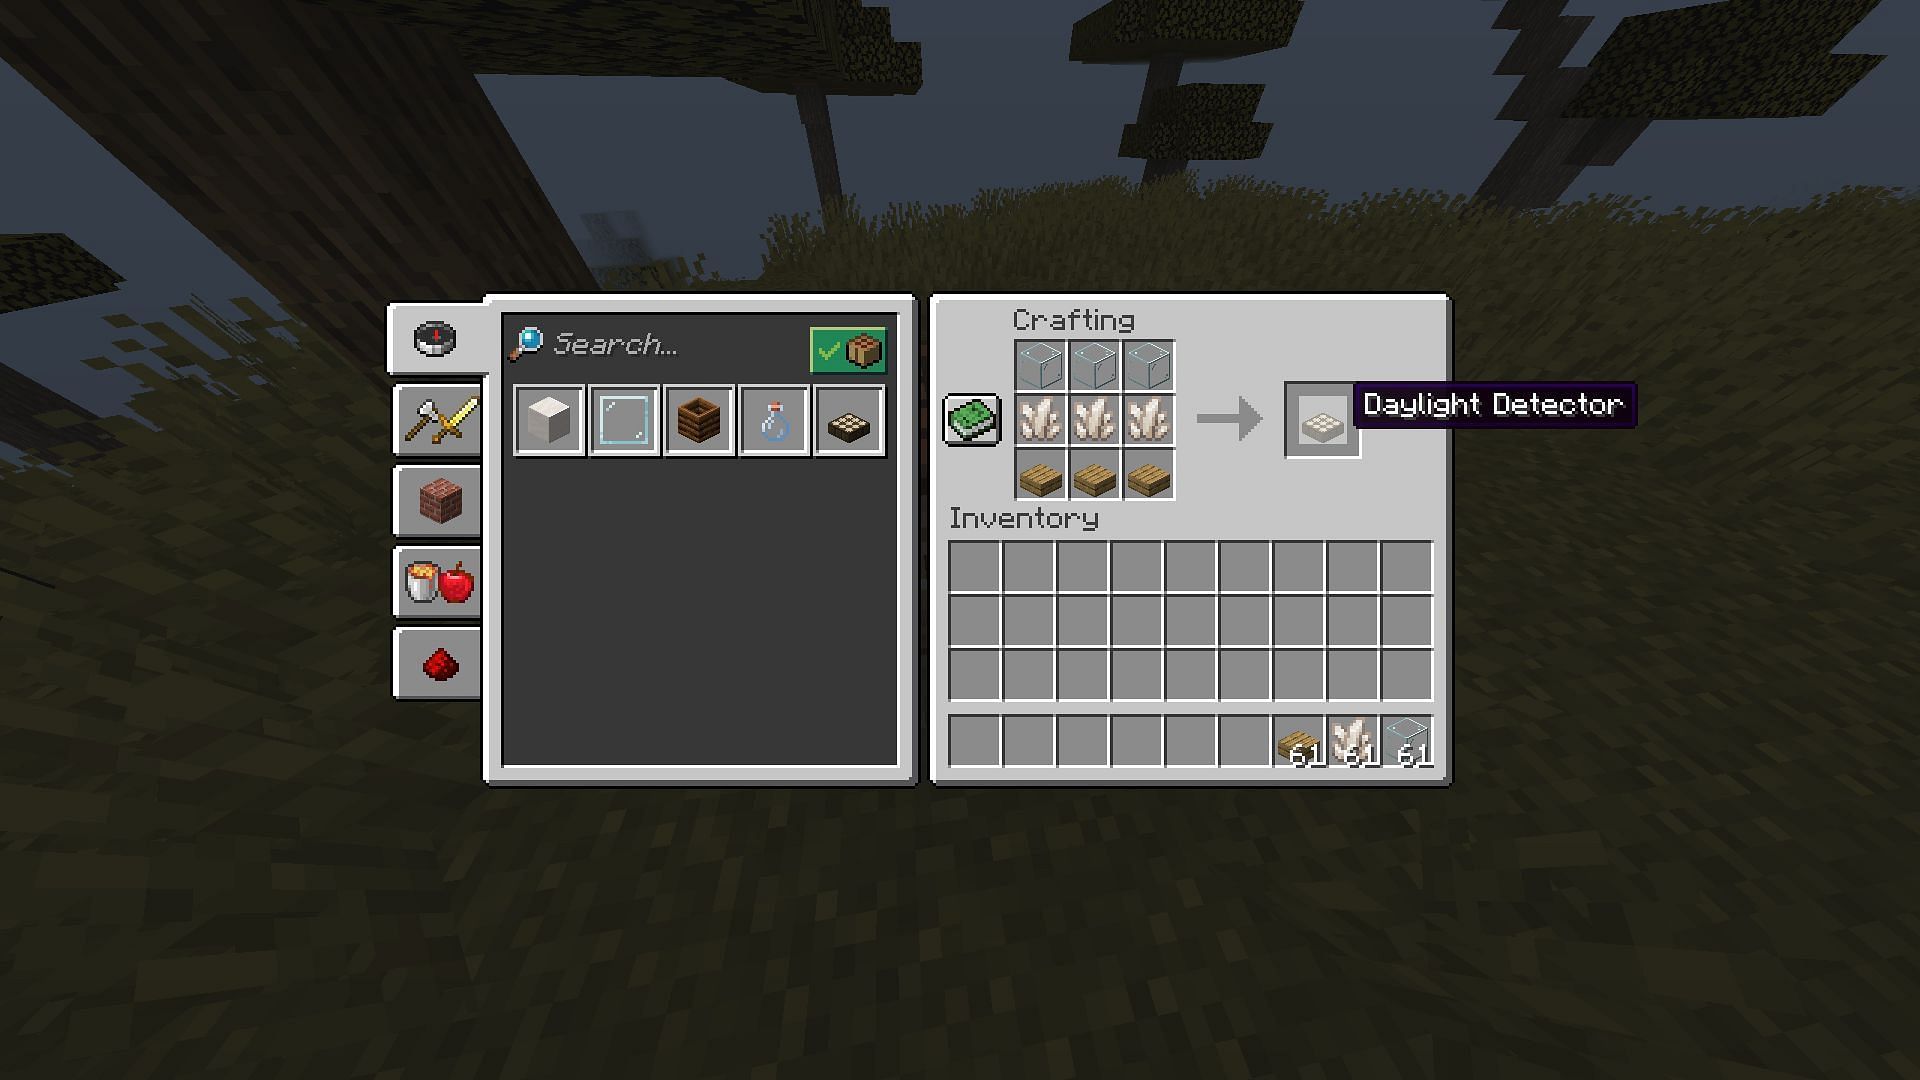 The recipe for a daylight detector (Image via Minecraft)